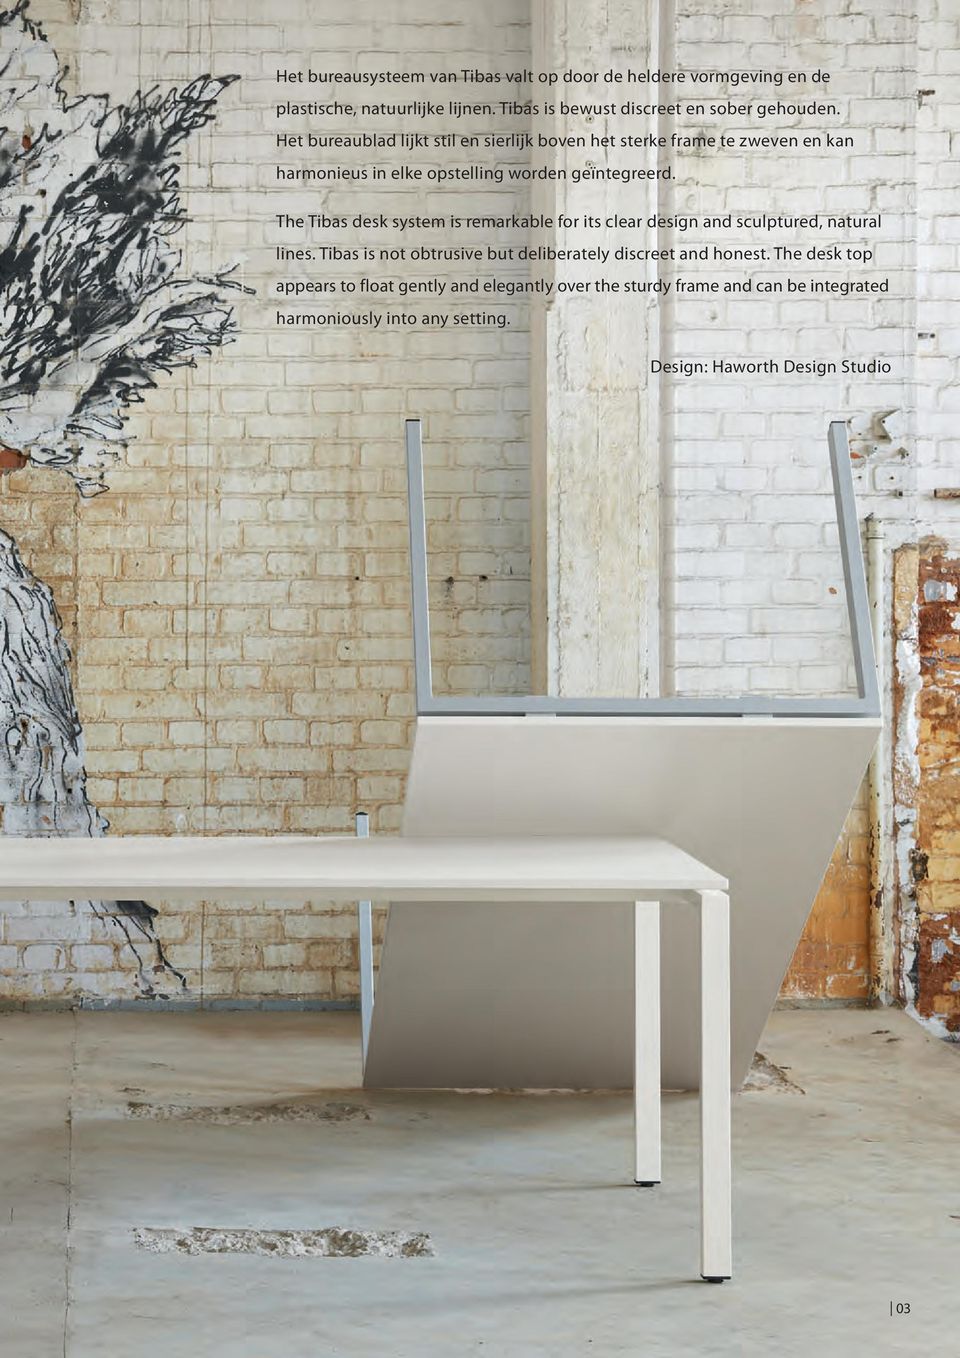 The Tibas desk system is remarkable for its clear design and sculptured, natural lines.